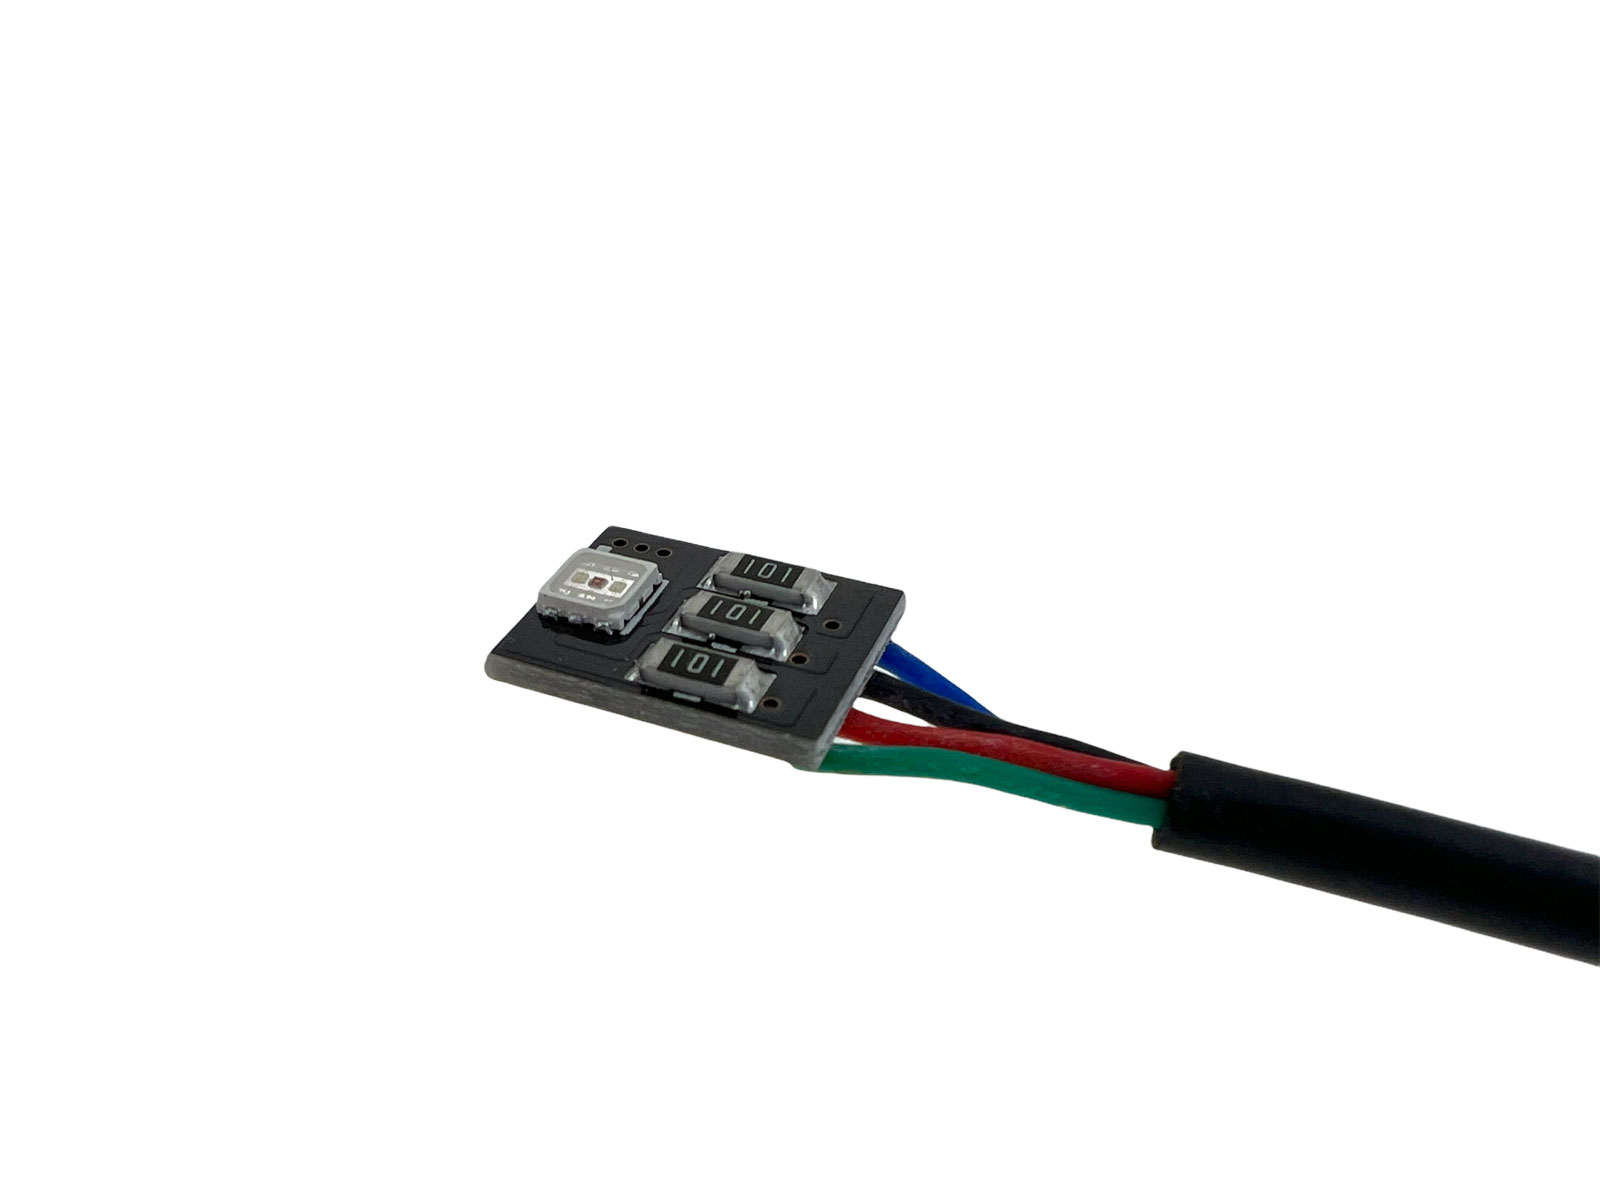 Ambientebeleuchtung LED Module